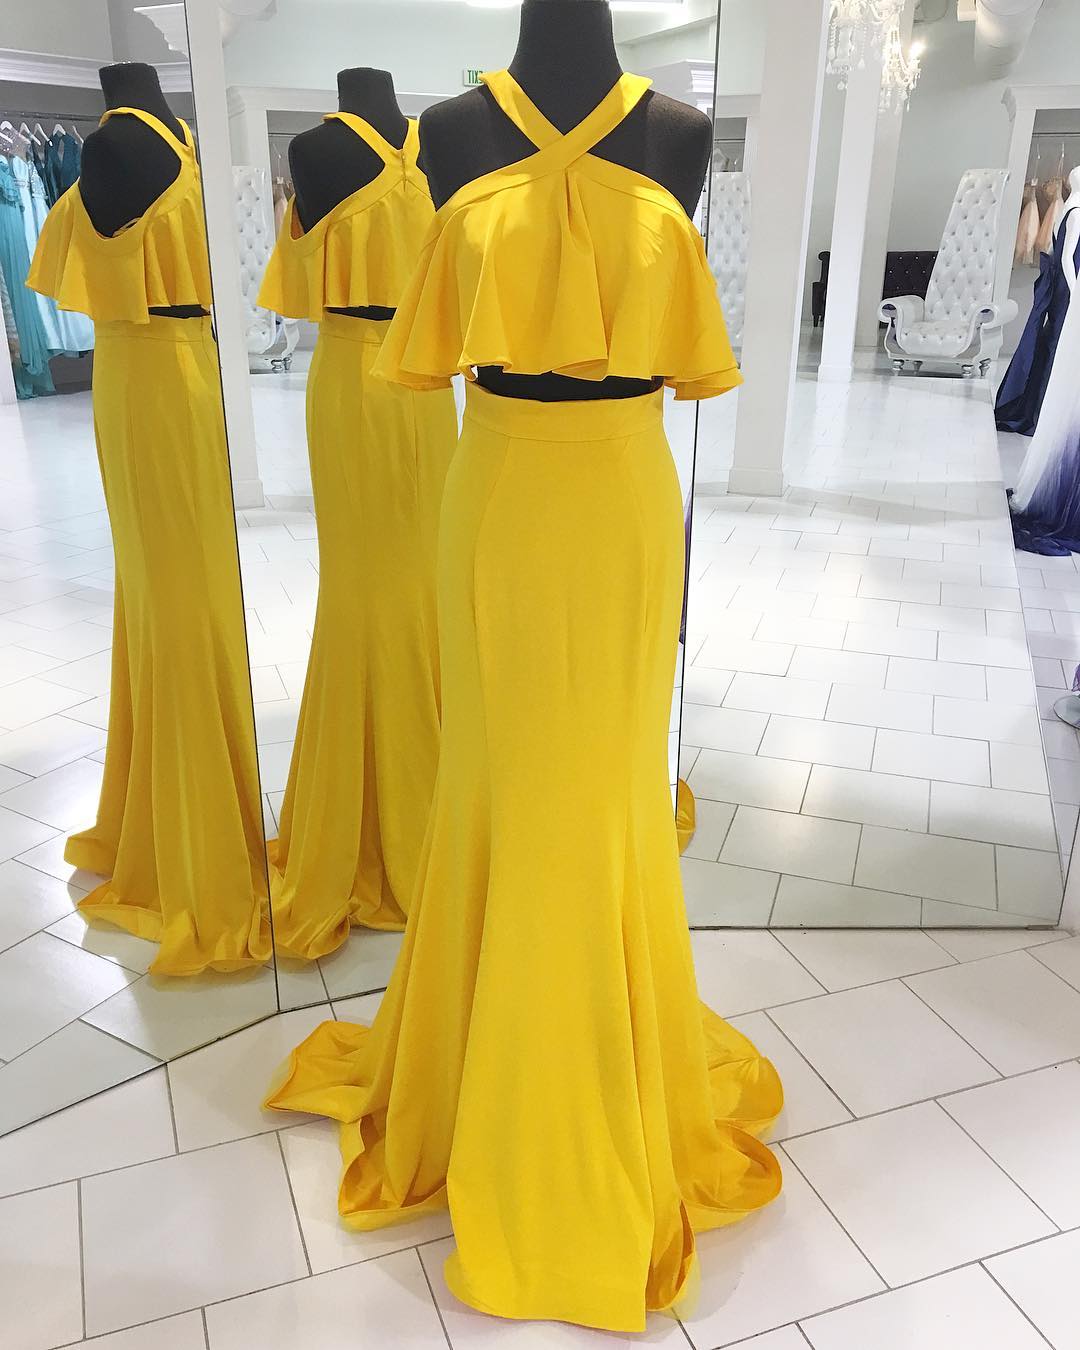 Two Piece Yellow Long Prom Dress With Ruffle,prom Dresses,evening Dress, Prom Gowns, Formal Women Dress,pd14745